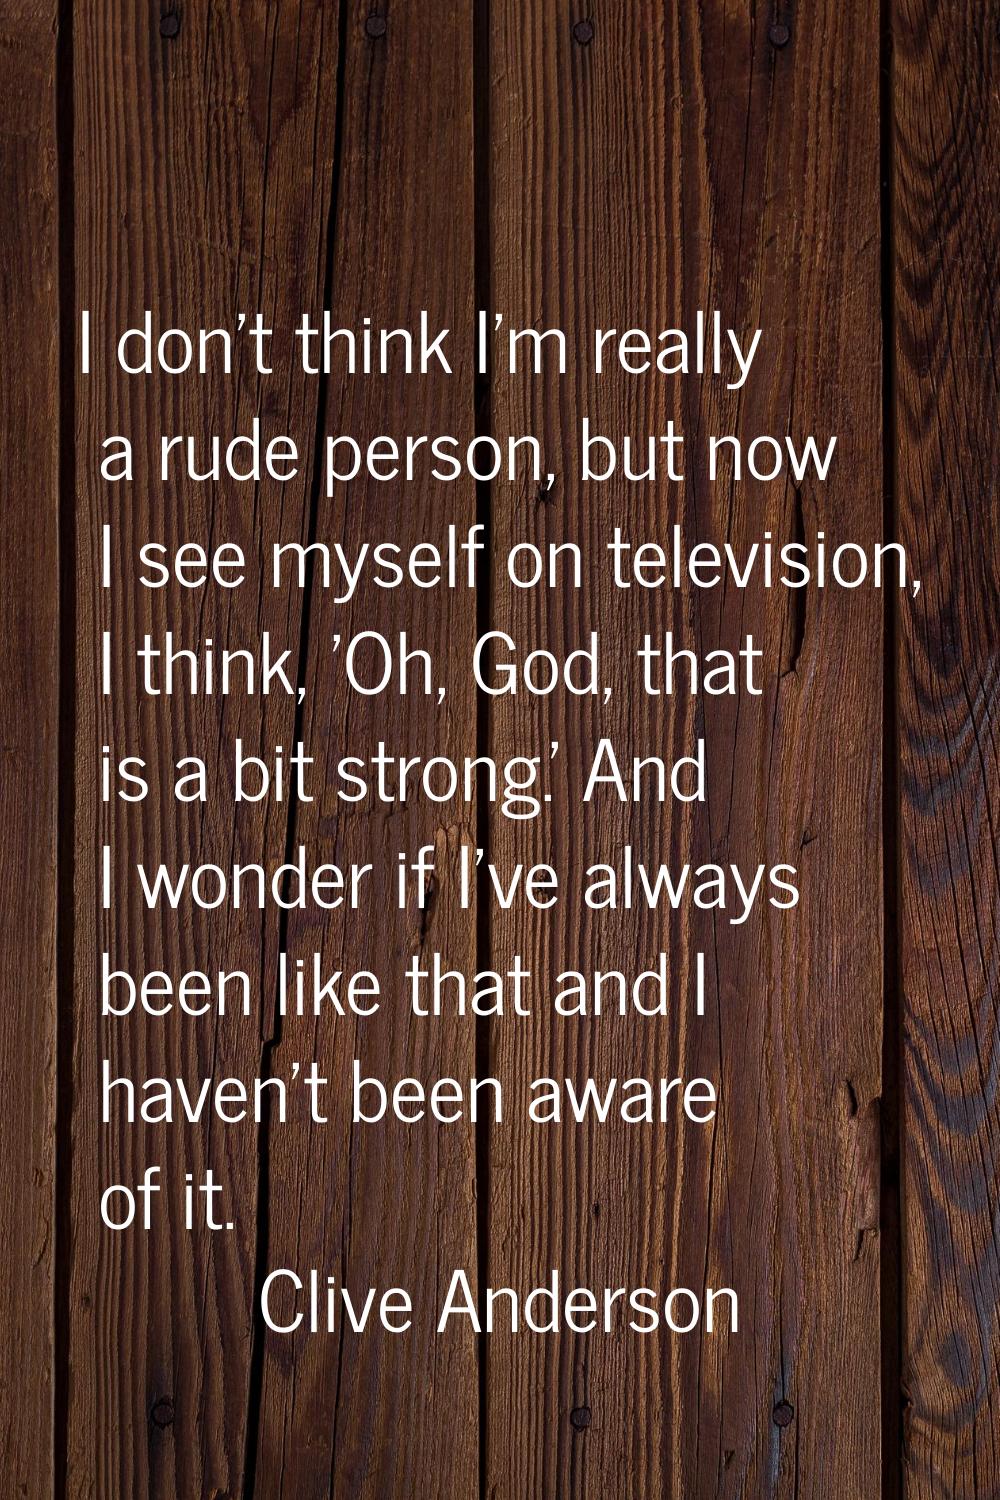 I don't think I'm really a rude person, but now I see myself on television, I think, 'Oh, God, that